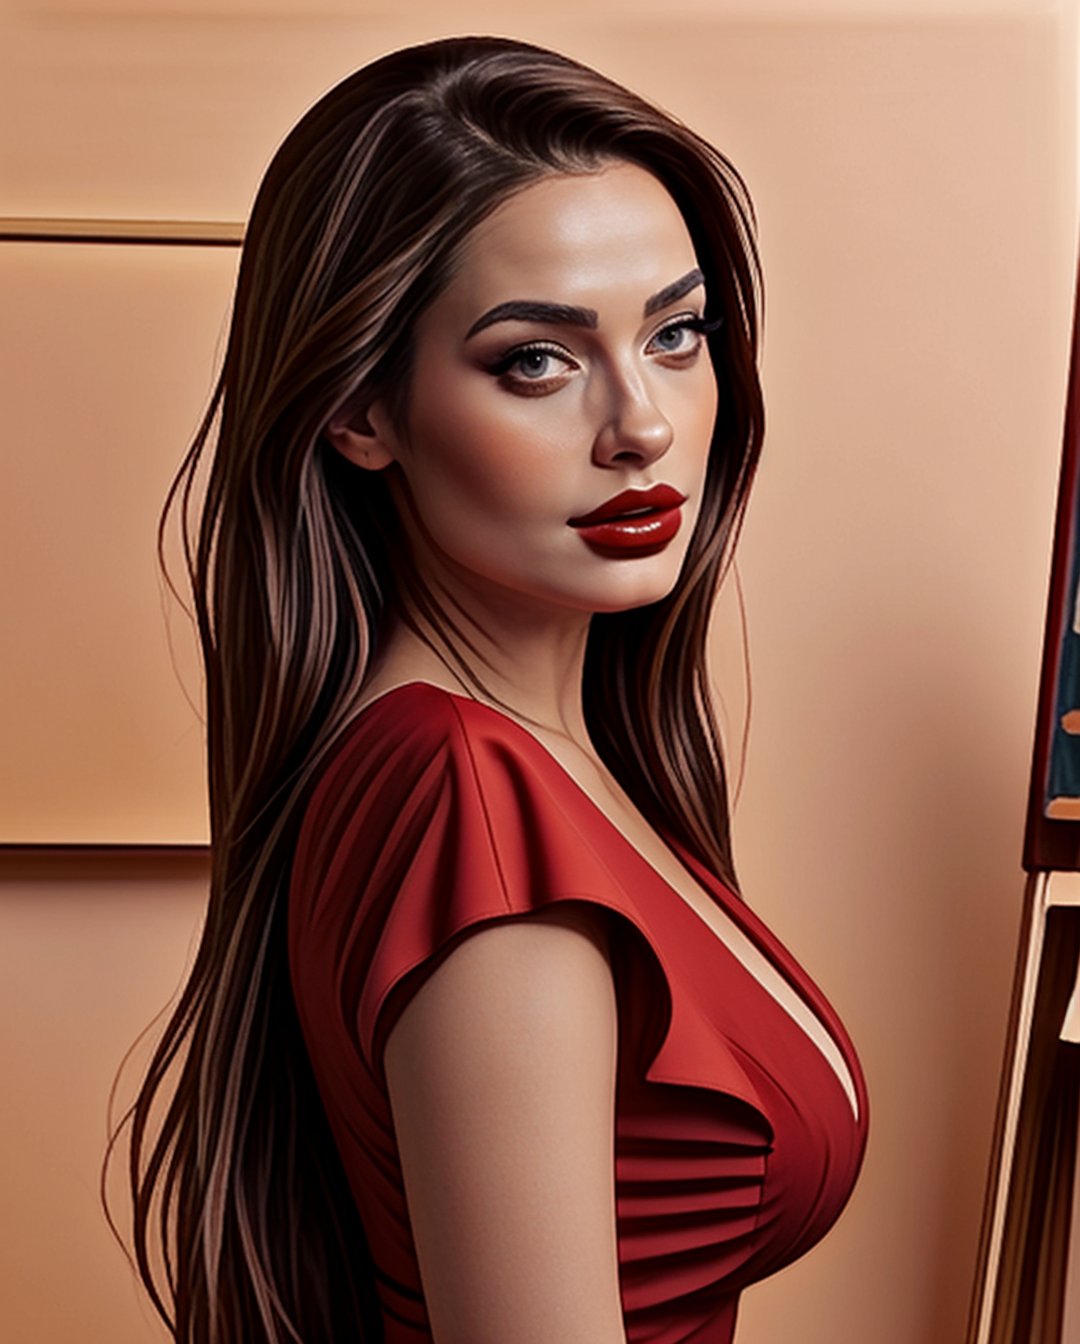 a painting of a woman in a red dress, fully clothed. painting of sexy, sexy red dress, digital art of an elegant, red dress, sultry digital painting, in a red dress, in style of digital illustration, girl wears a red dress, elegant digital painting, cartoon digital painting, wearing red dress, Ptcard,,<lora:659111690174031528:1.0>